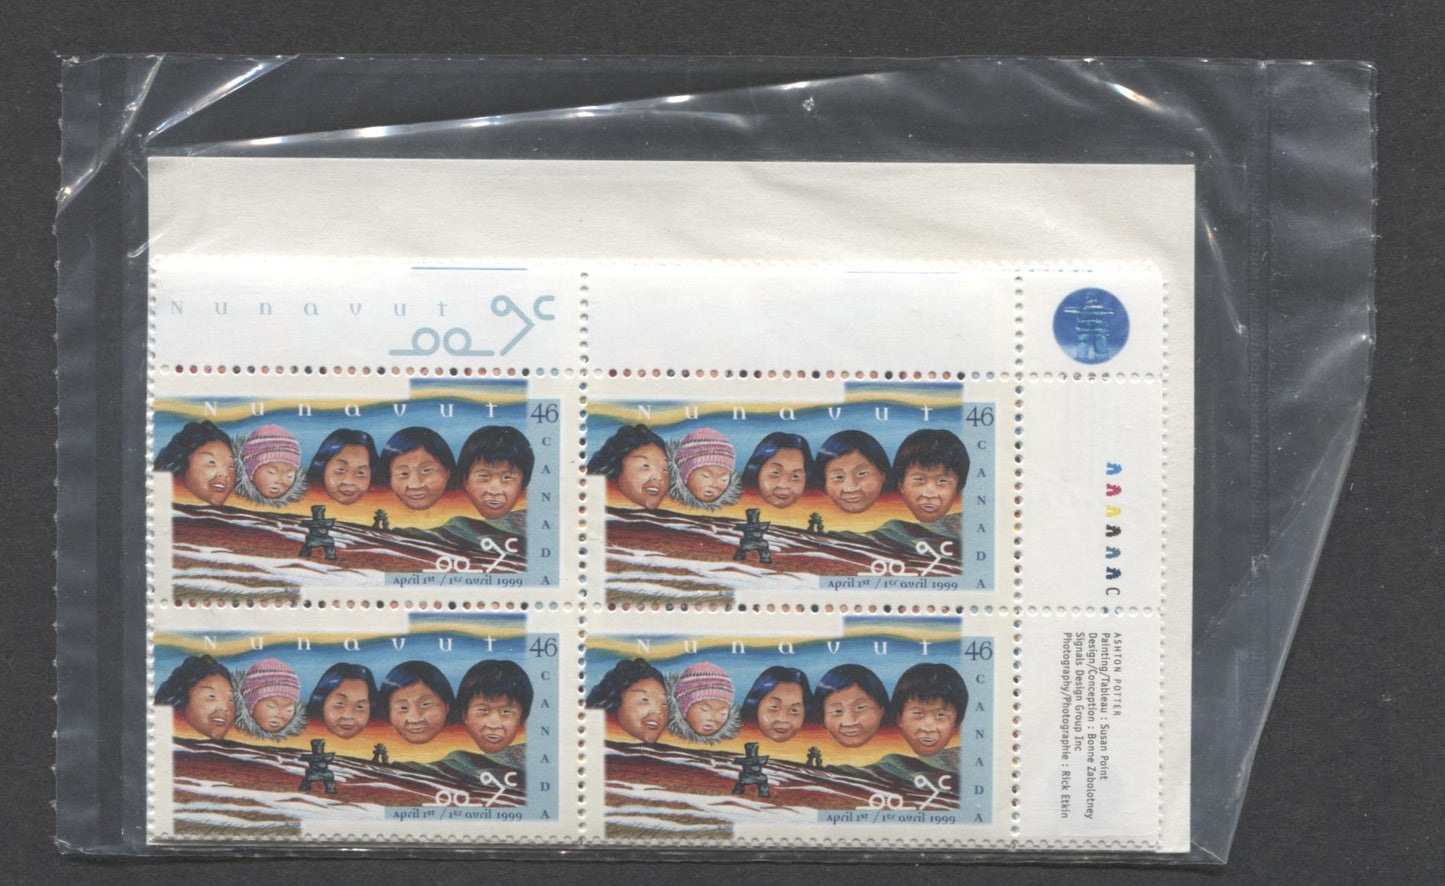 Lot 321 Canada #1784 46c Multicolored Inuit Faces & Landscape 1999 Creation Of Nunavut Territory, Canada Post Sealed Pack of Inscription Blocks on TRC Paper With DF Type 7A Insert Card, VFNH, Unitrade Cat. $18